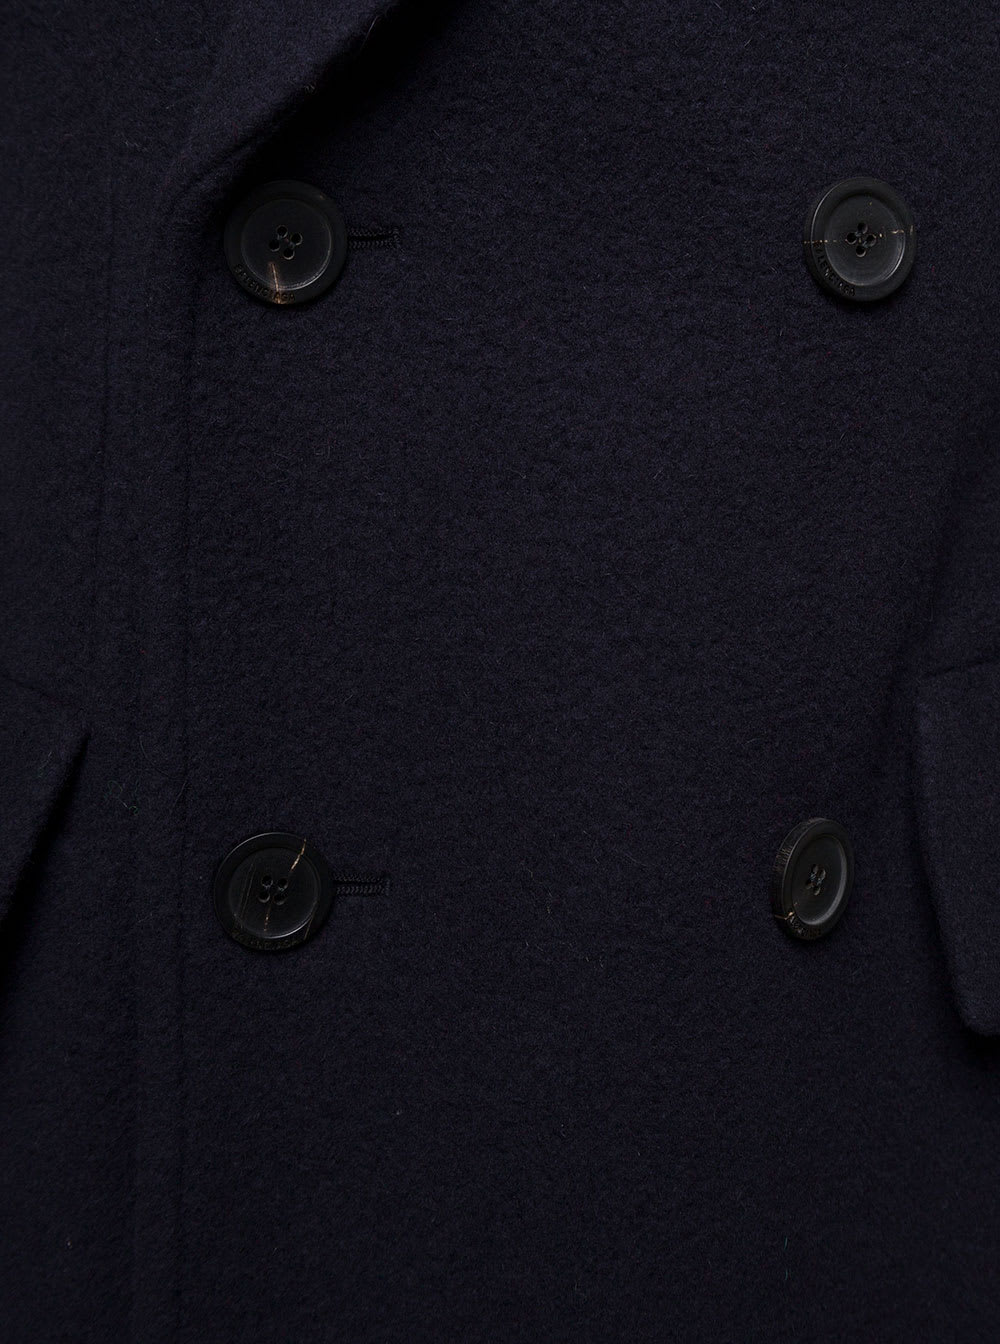 Hevo Double-Breasted Tailored Coat